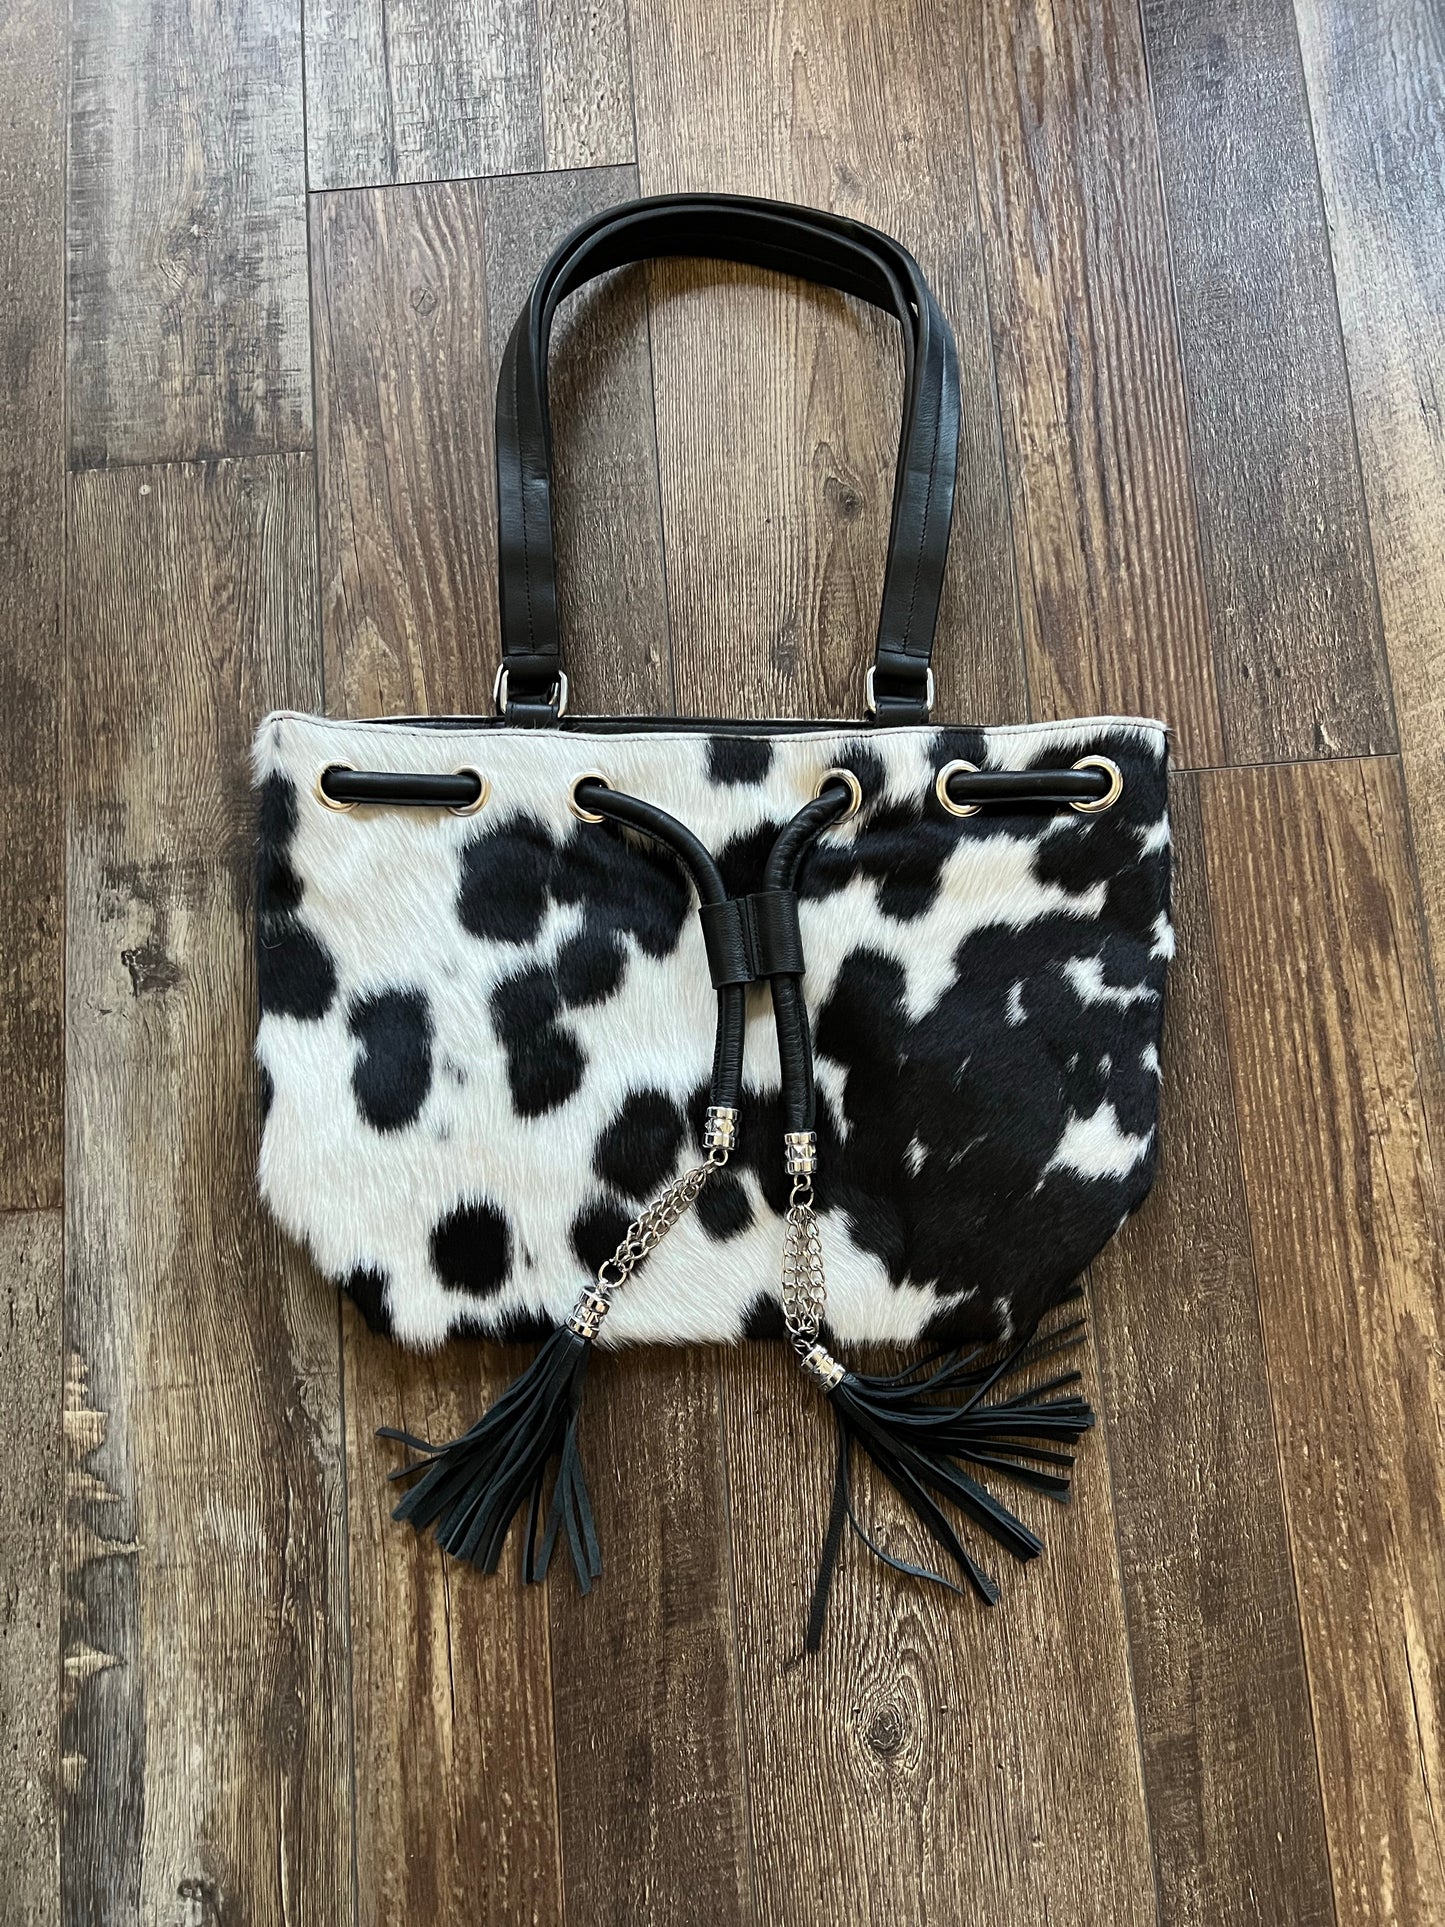 The Black and White Cow Hide Purse